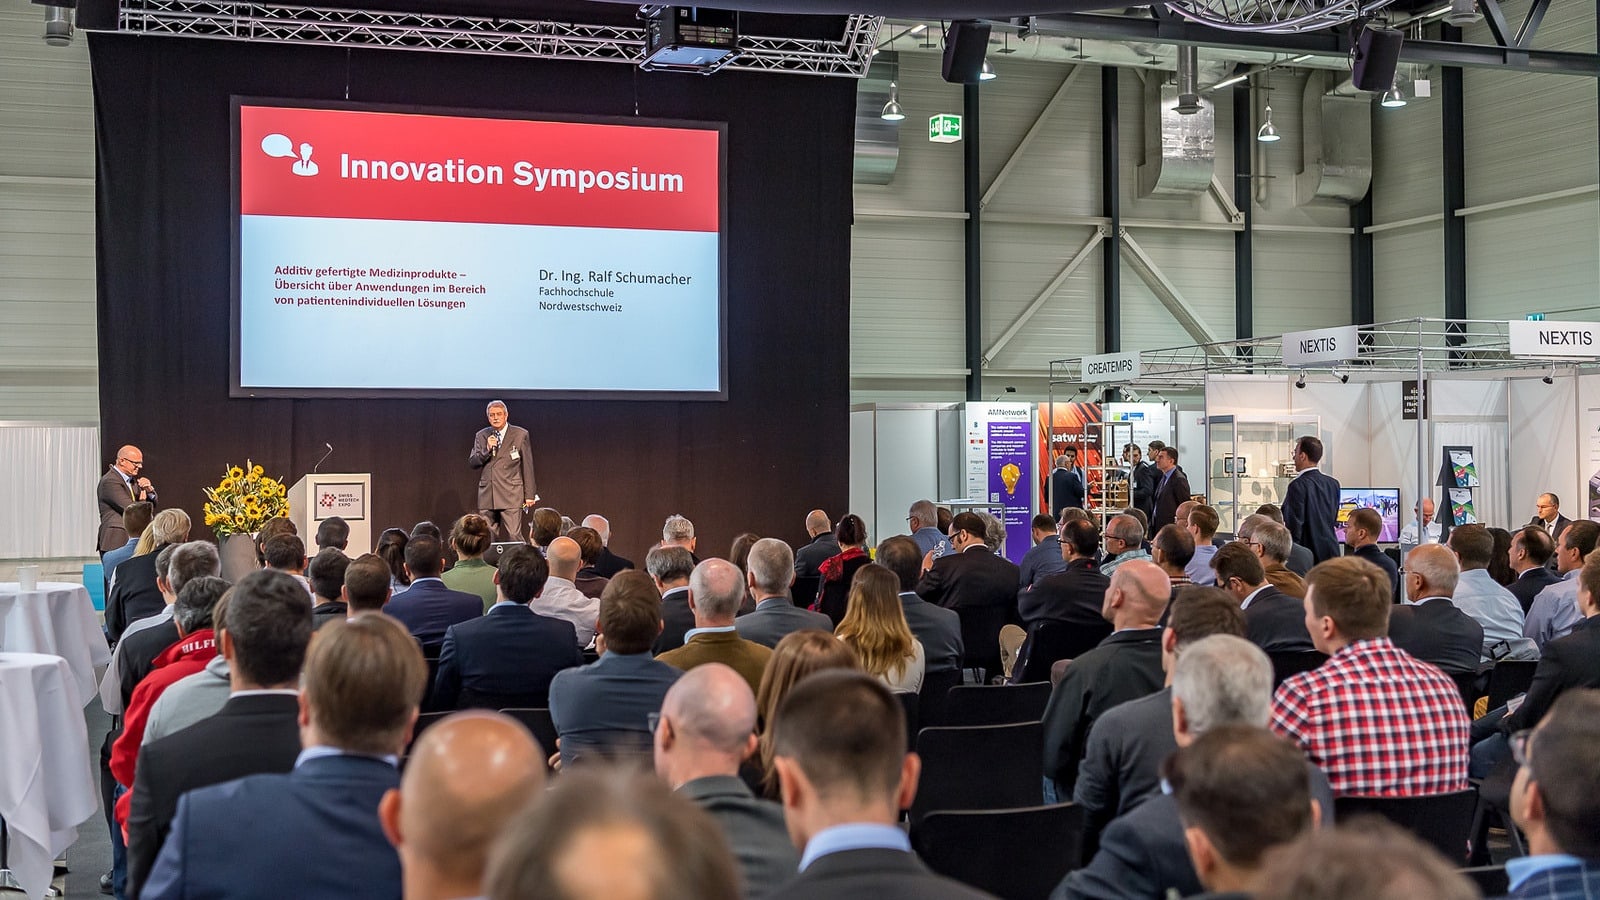 The trade visitors also received suggestions at the lectures in the Innovation Symposium.